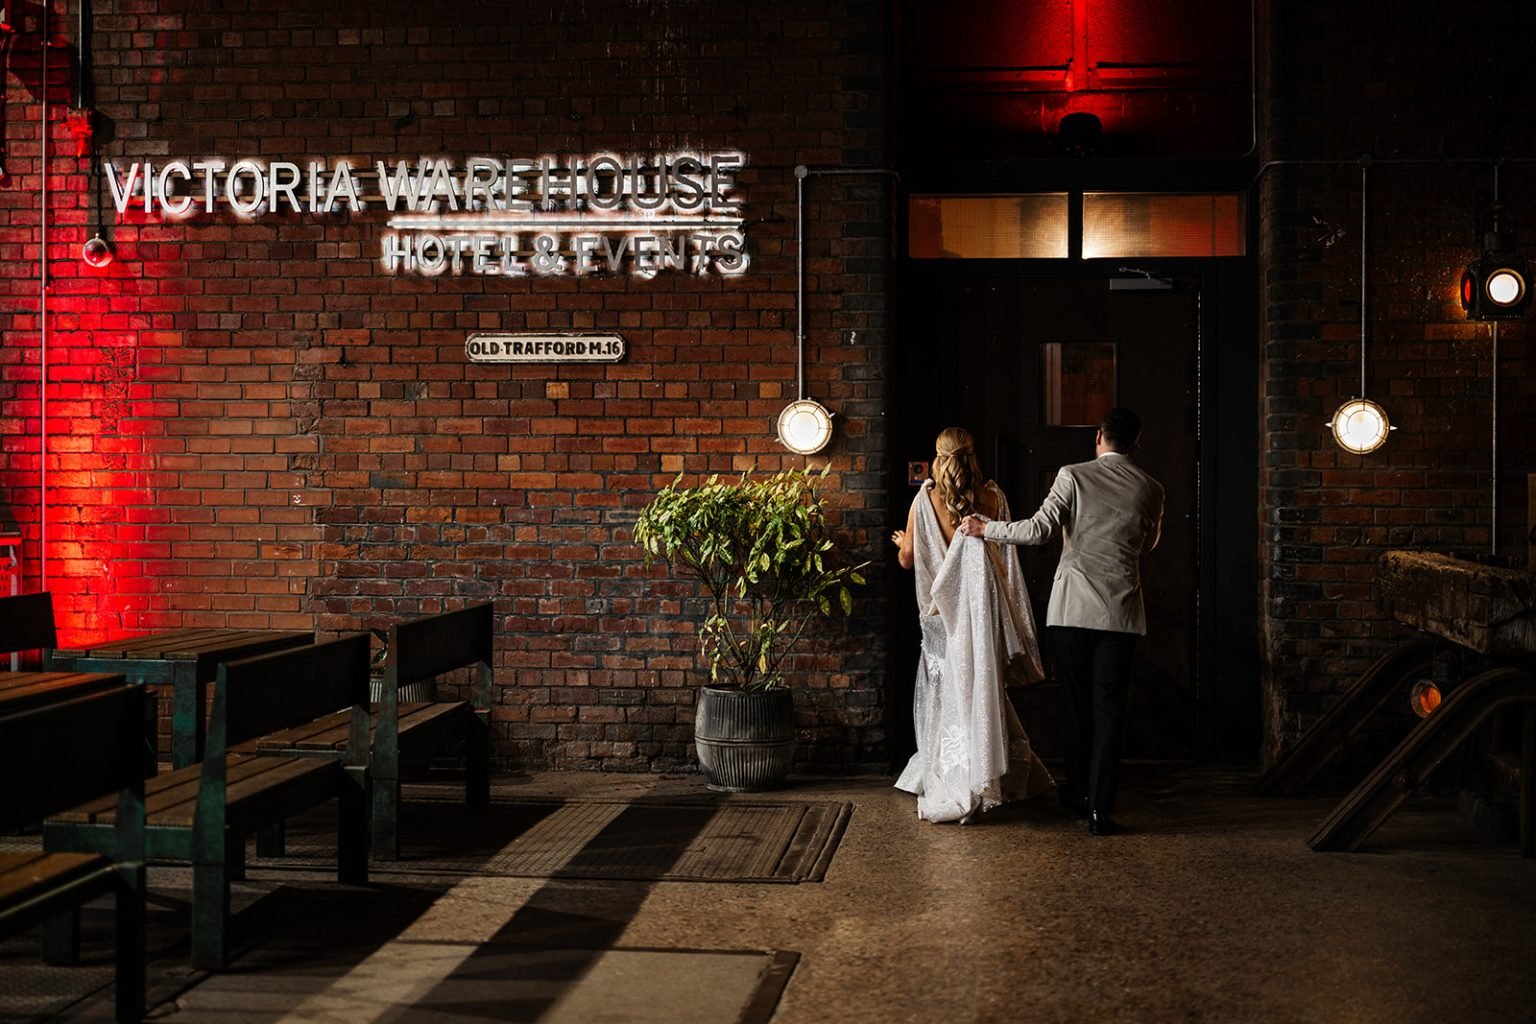  Photographer Credit: Hollie &amp; Patrick Mateer  Bride and groom about to walk through a doorway inside the beautiful Victoria Warehouse. To the left of the bride there is an exposed brick wall with VICTORIA WAREHOUSE sign lit up and underneath it 